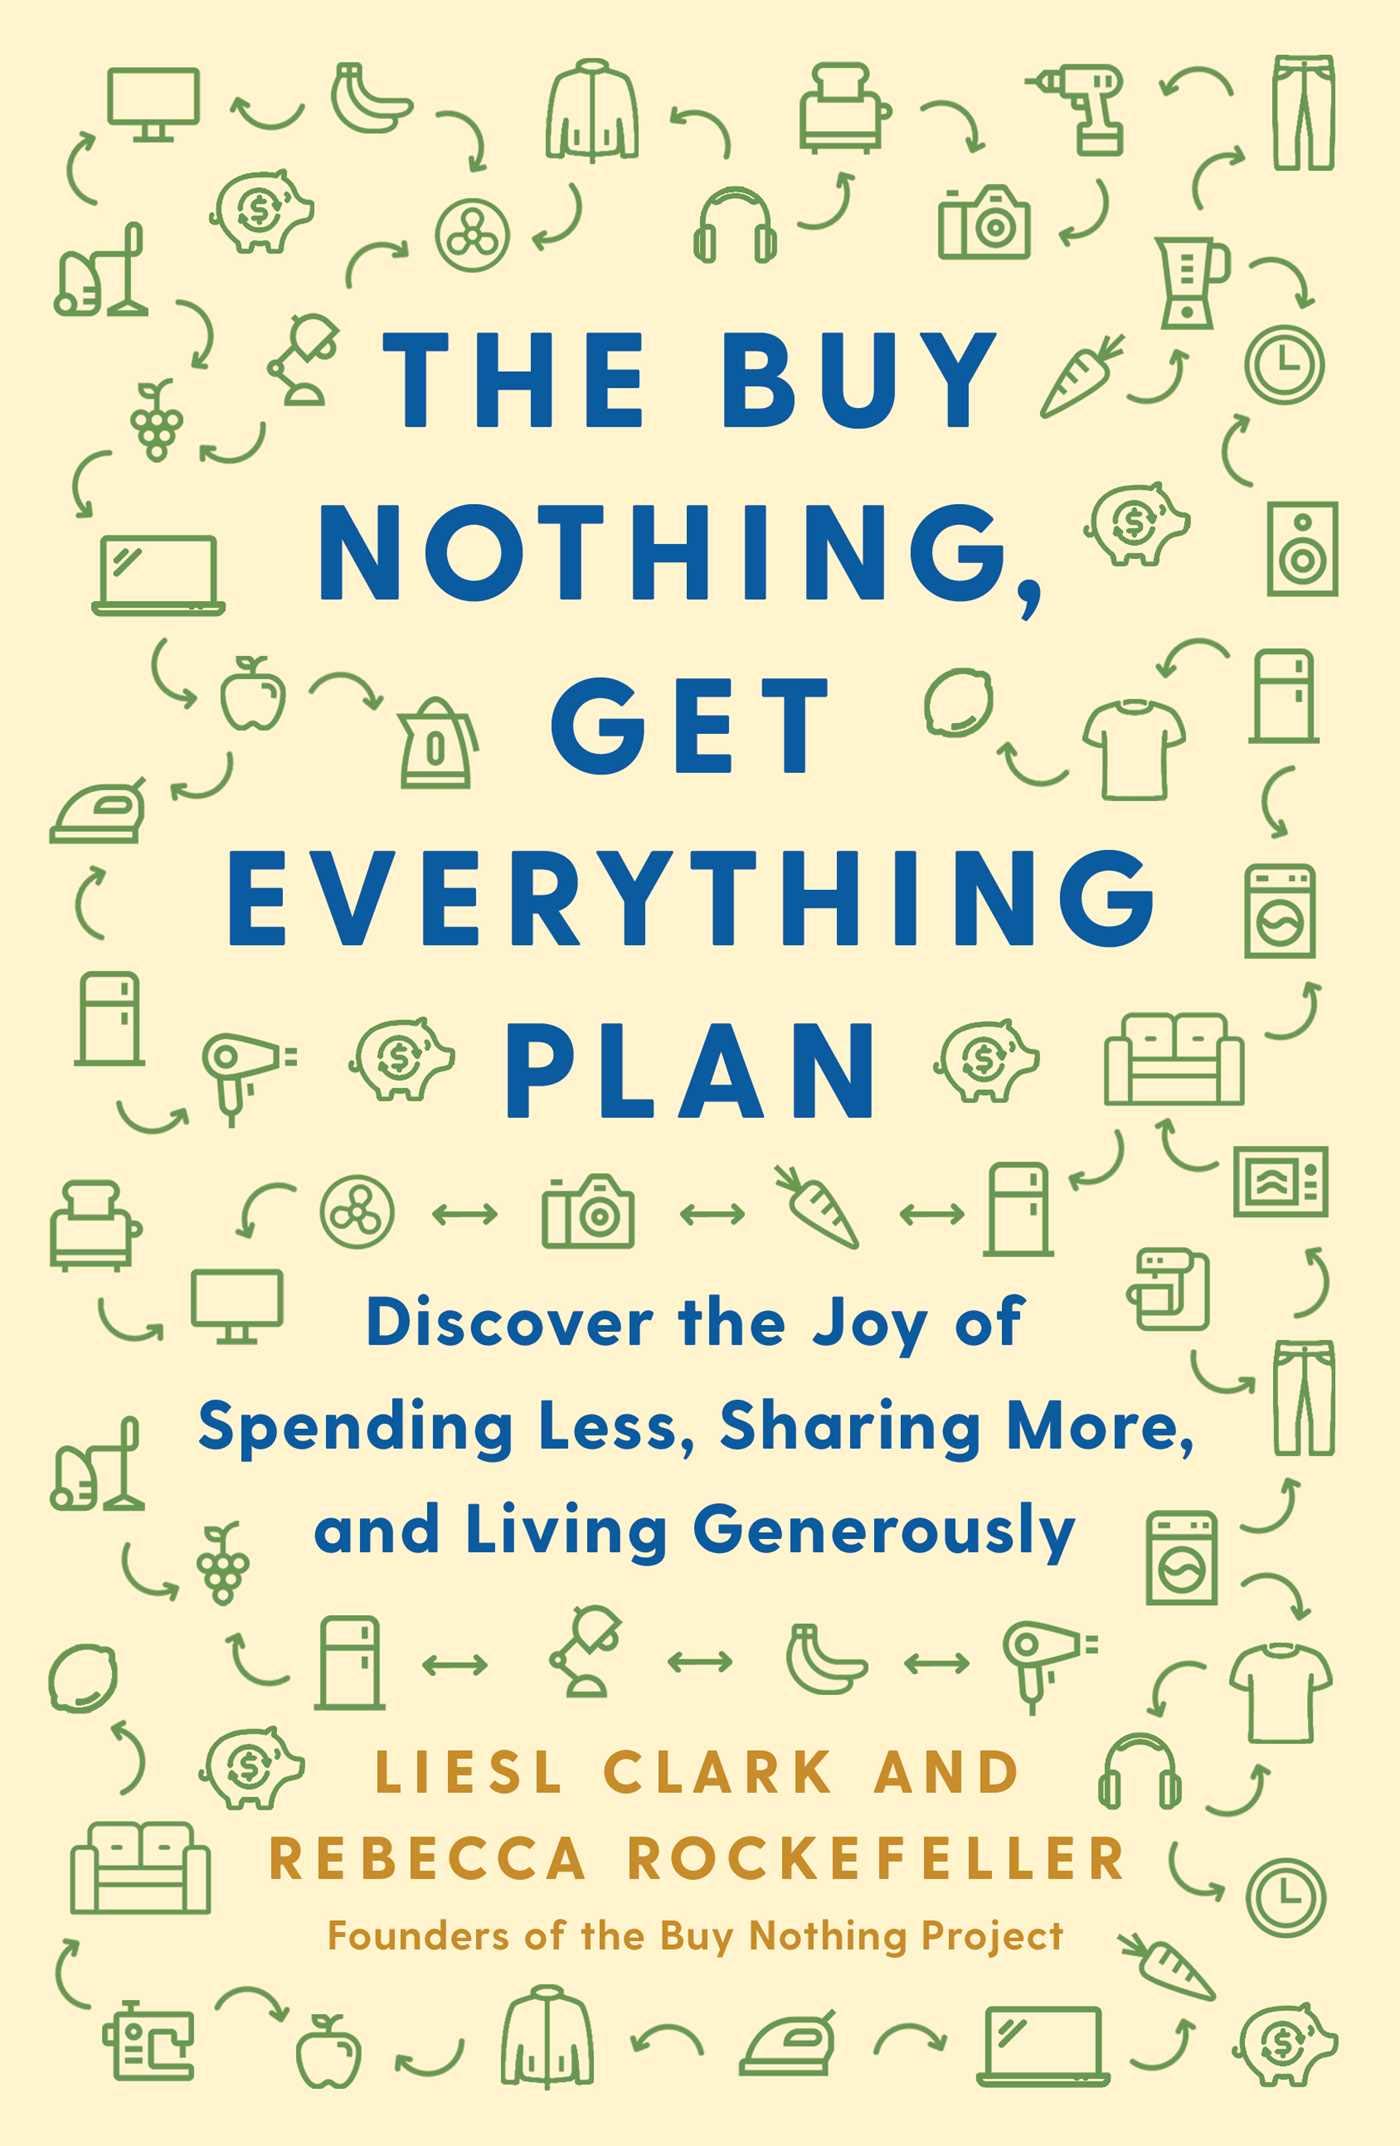 Image for "The Buy Nothing, Get Everything Plan"